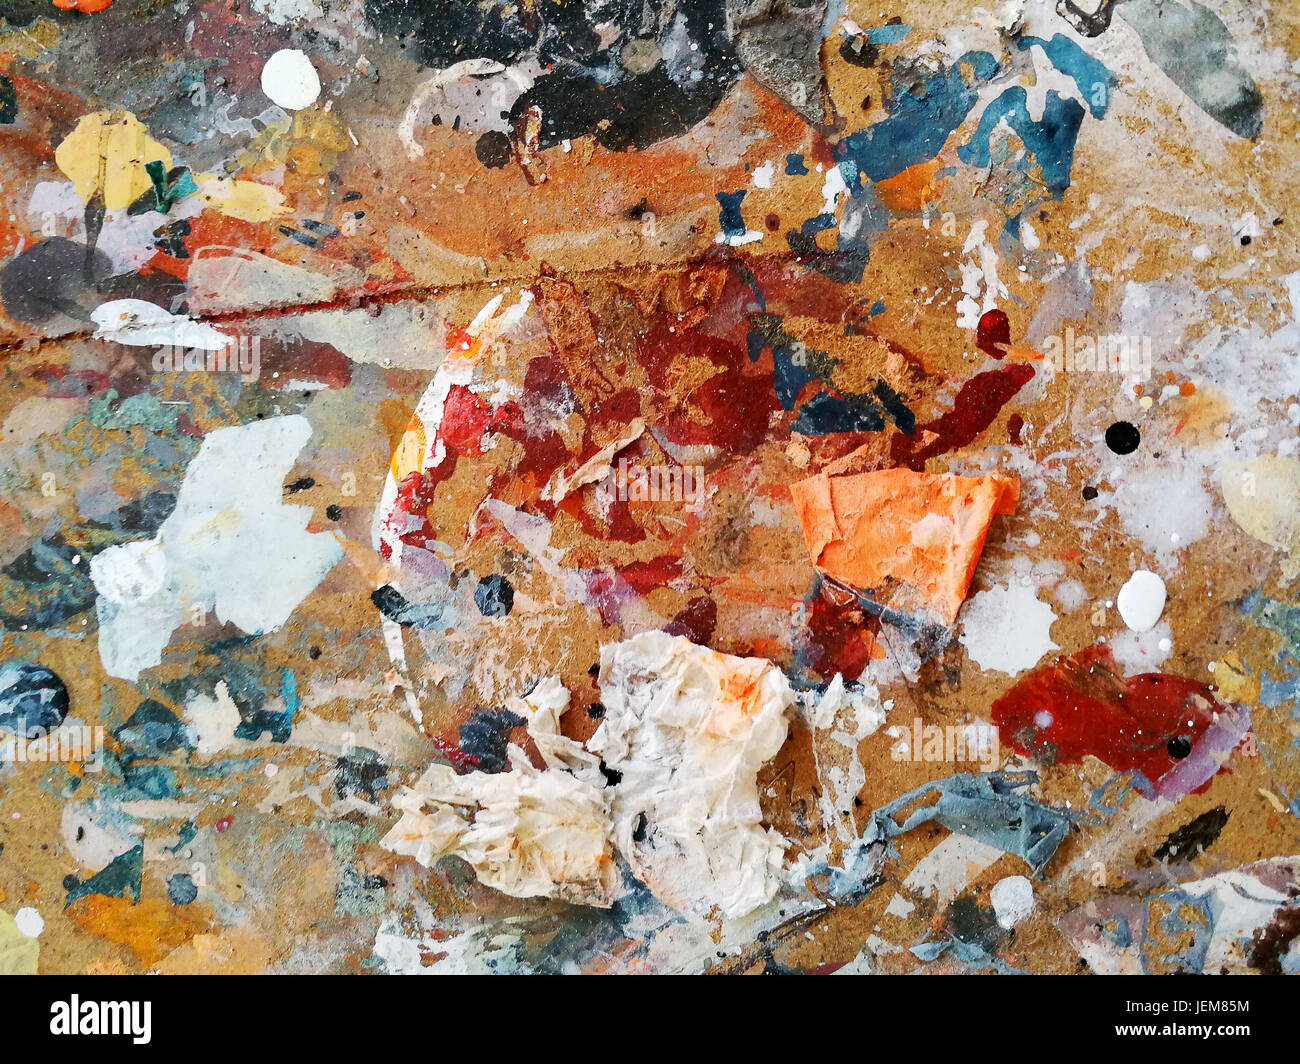 Chipboard on which it has been randomly painted with various colors of different types, forms a harmonious and multicolored design. Stock Photo